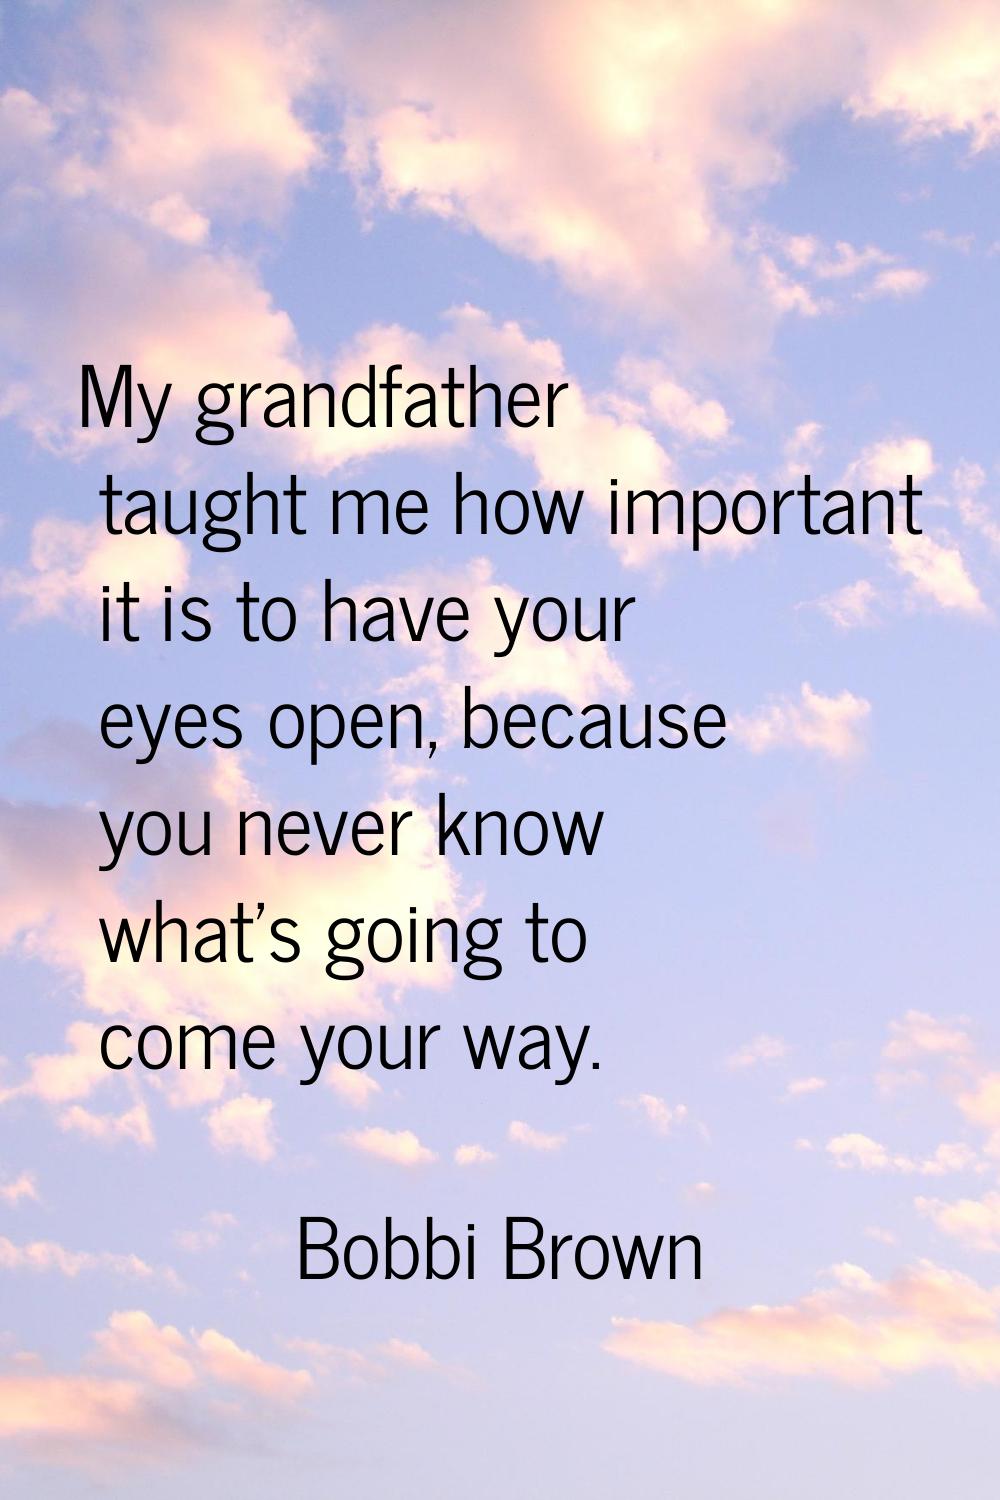 My grandfather taught me how important it is to have your eyes open, because you never know what's 